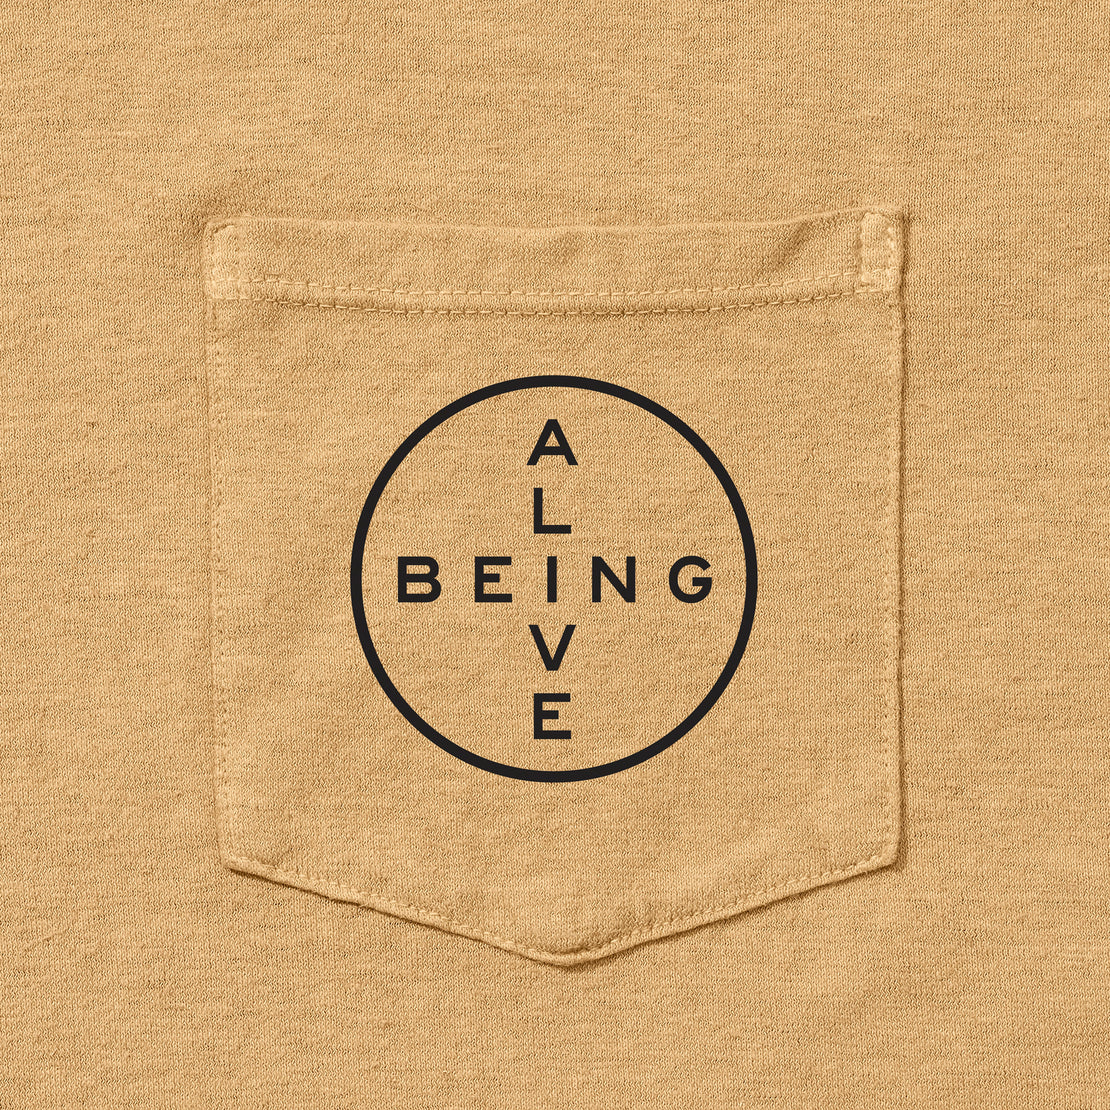 Being Alive Tee - Tan